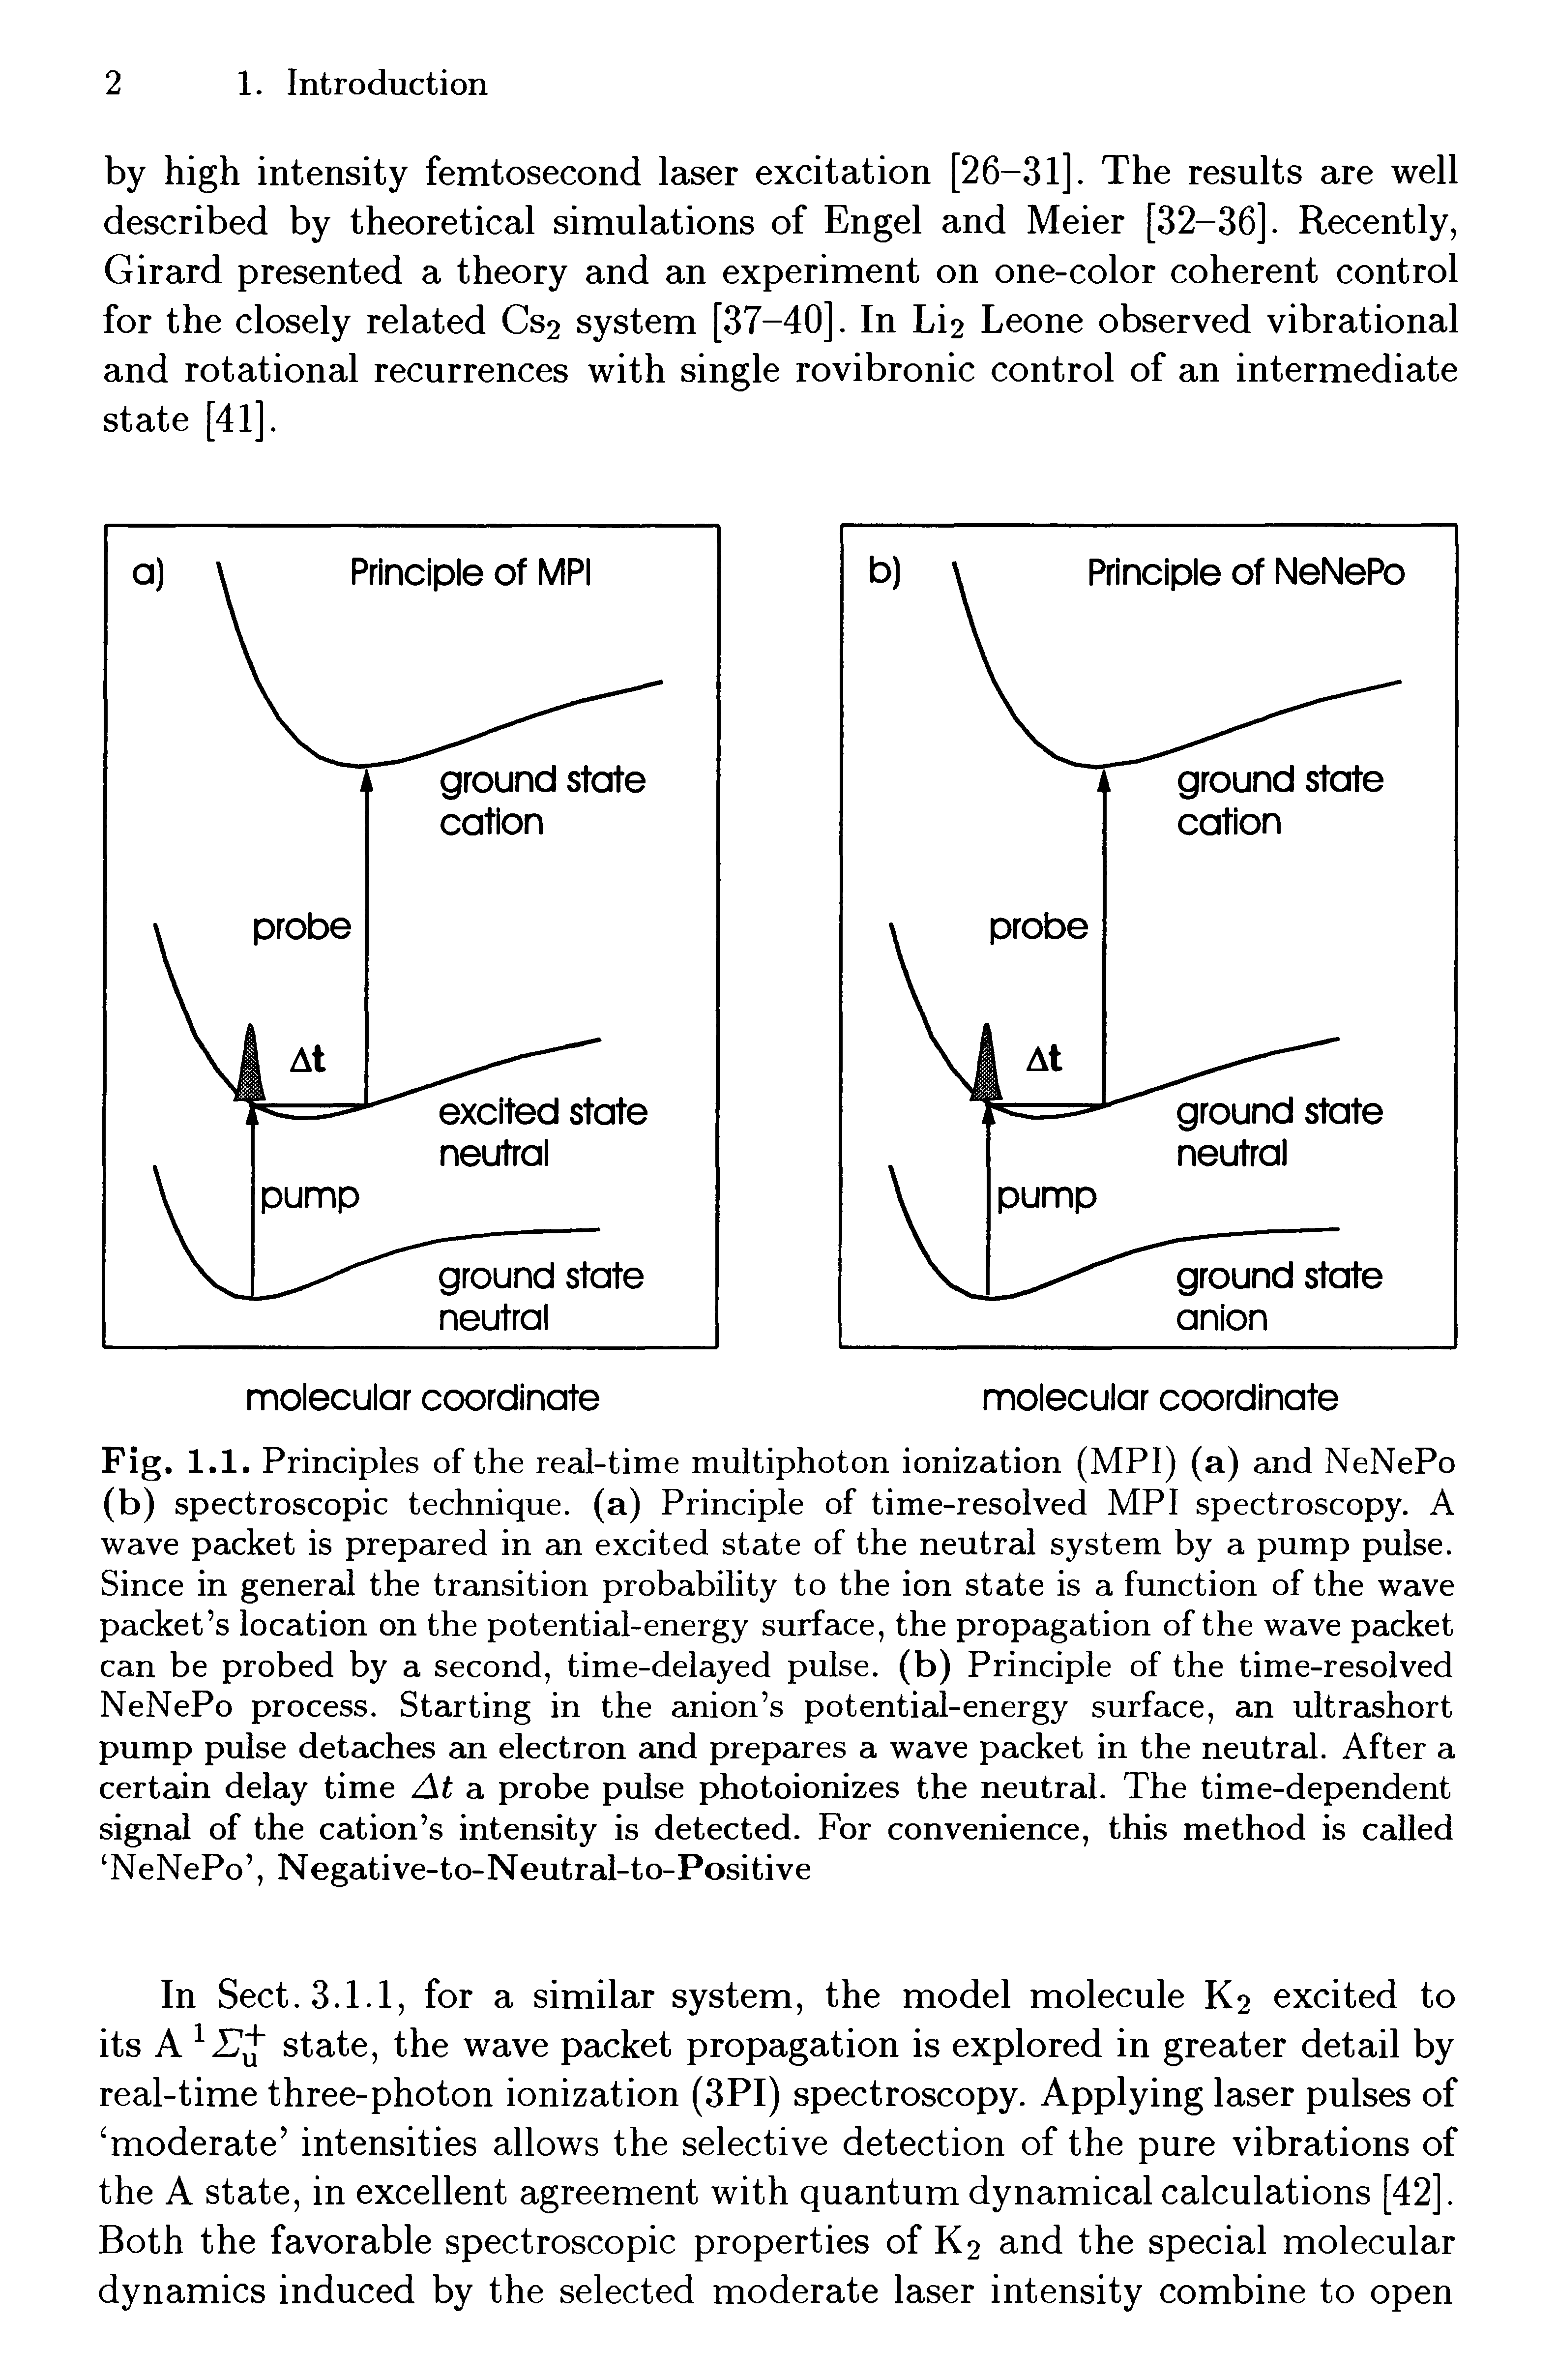 Fig. 1.1. Principles of the real-time multiphoton ionization (MPI) (a) and NeNePo (b) spectroscopic technique, (a) Principle of time-resolved MPI spectroscopy. A wave packet is prepared in an excited state of the neutral system by a pump pulse. Since in general the transition probability to the ion state is a function of the wave packet s location on the potential-energy surface, the propagation of the wave packet can be probed by a second, time-delayed pulse, (b) Principle of the time-resolved NeNePo process. Starting in the anion s potential-energy surface, an ultrashort pump pulse detaches an electron cuid prepares a wave packet in the neutrcd. After a certain delay time At a probe pulse photoionizes the neutral. The time-dependent signal of the cation s intensity is detected. For convenience, this method is called NeNePo , Negative-to-Neutrcd-to-Positive...